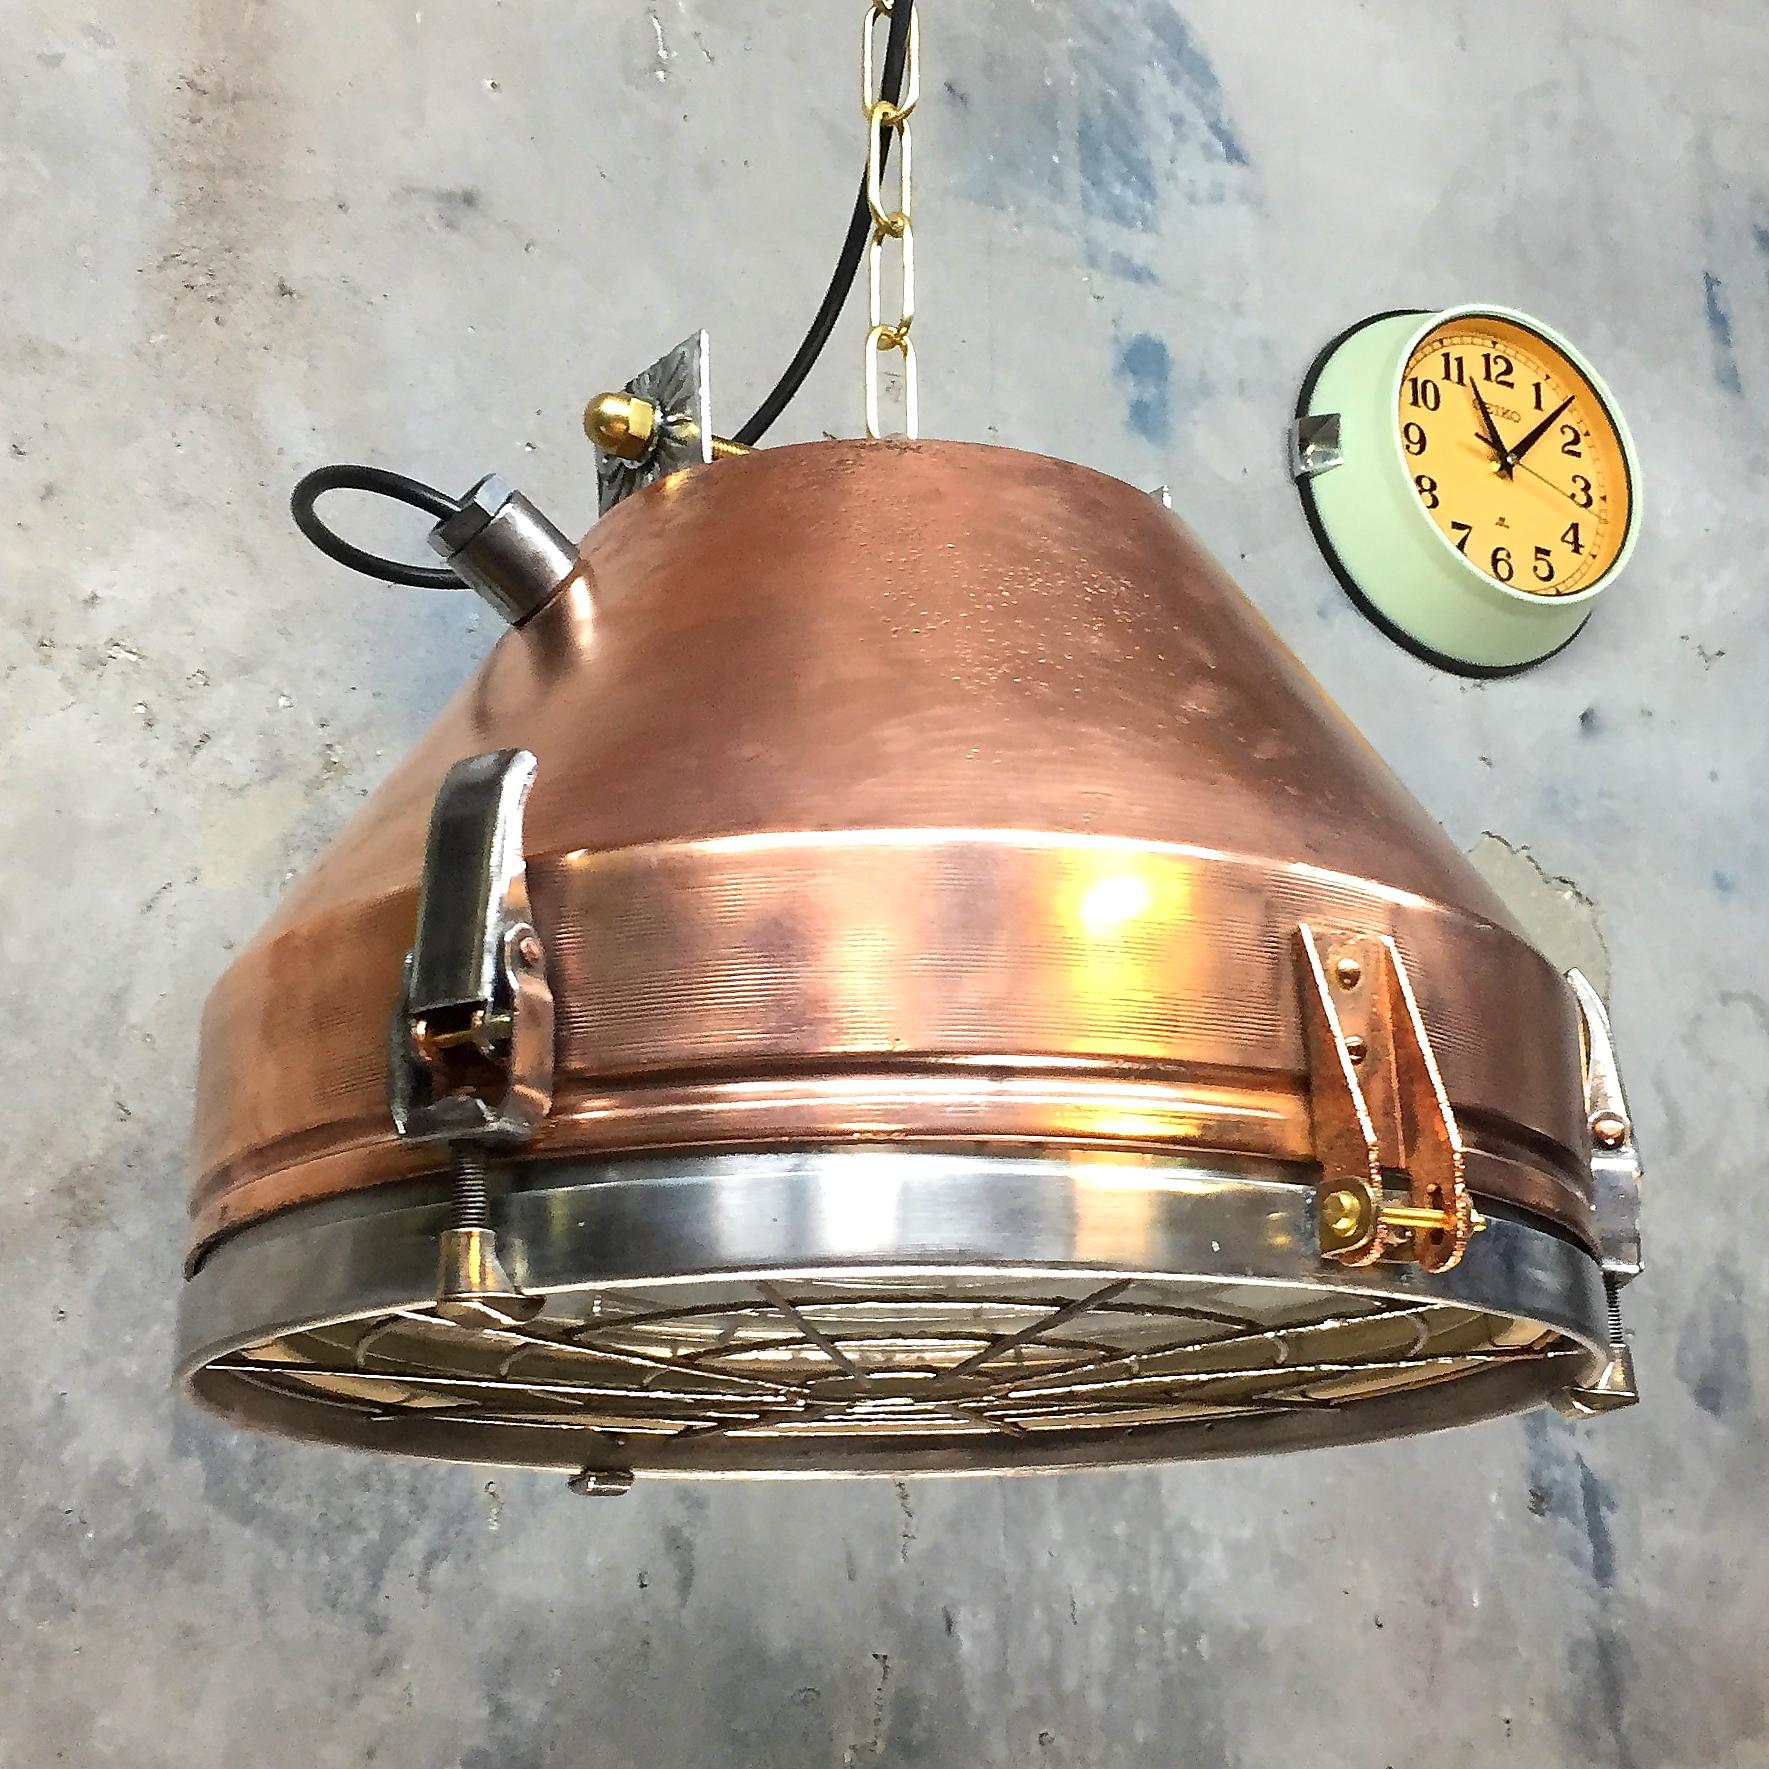 VEB copper and aluminium pendant with target grill.

VEB was formed in he early 1950s and was the biggest Luminaire manufacturer in the GDR.

The publicly owned operation (German: Volkseigener Betrieb; abbreviated VEB) was the main legal form of